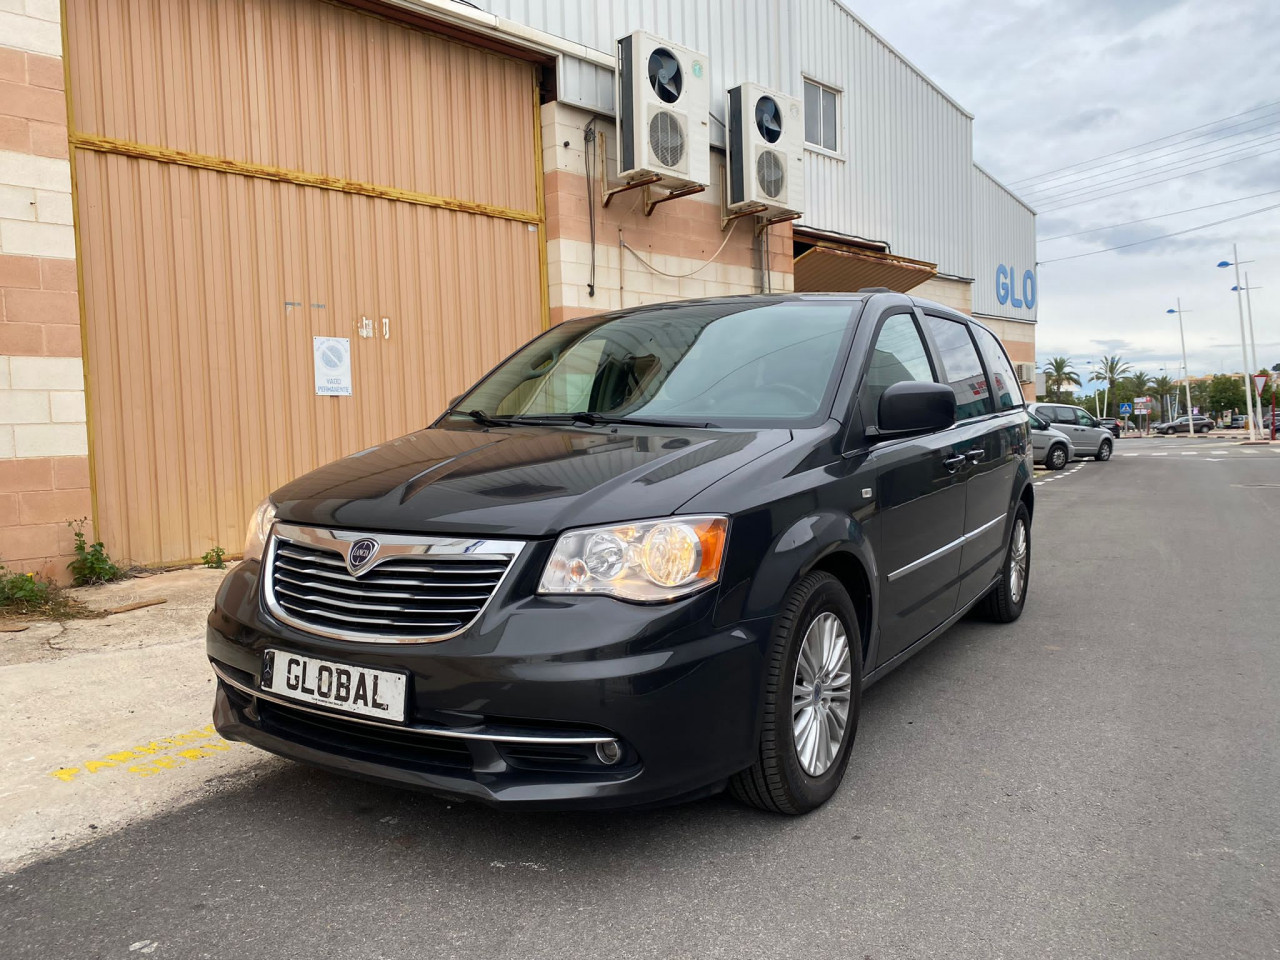 Lancia Grand Voyager 2.8 Crdi Gold Automático People carrier Foto